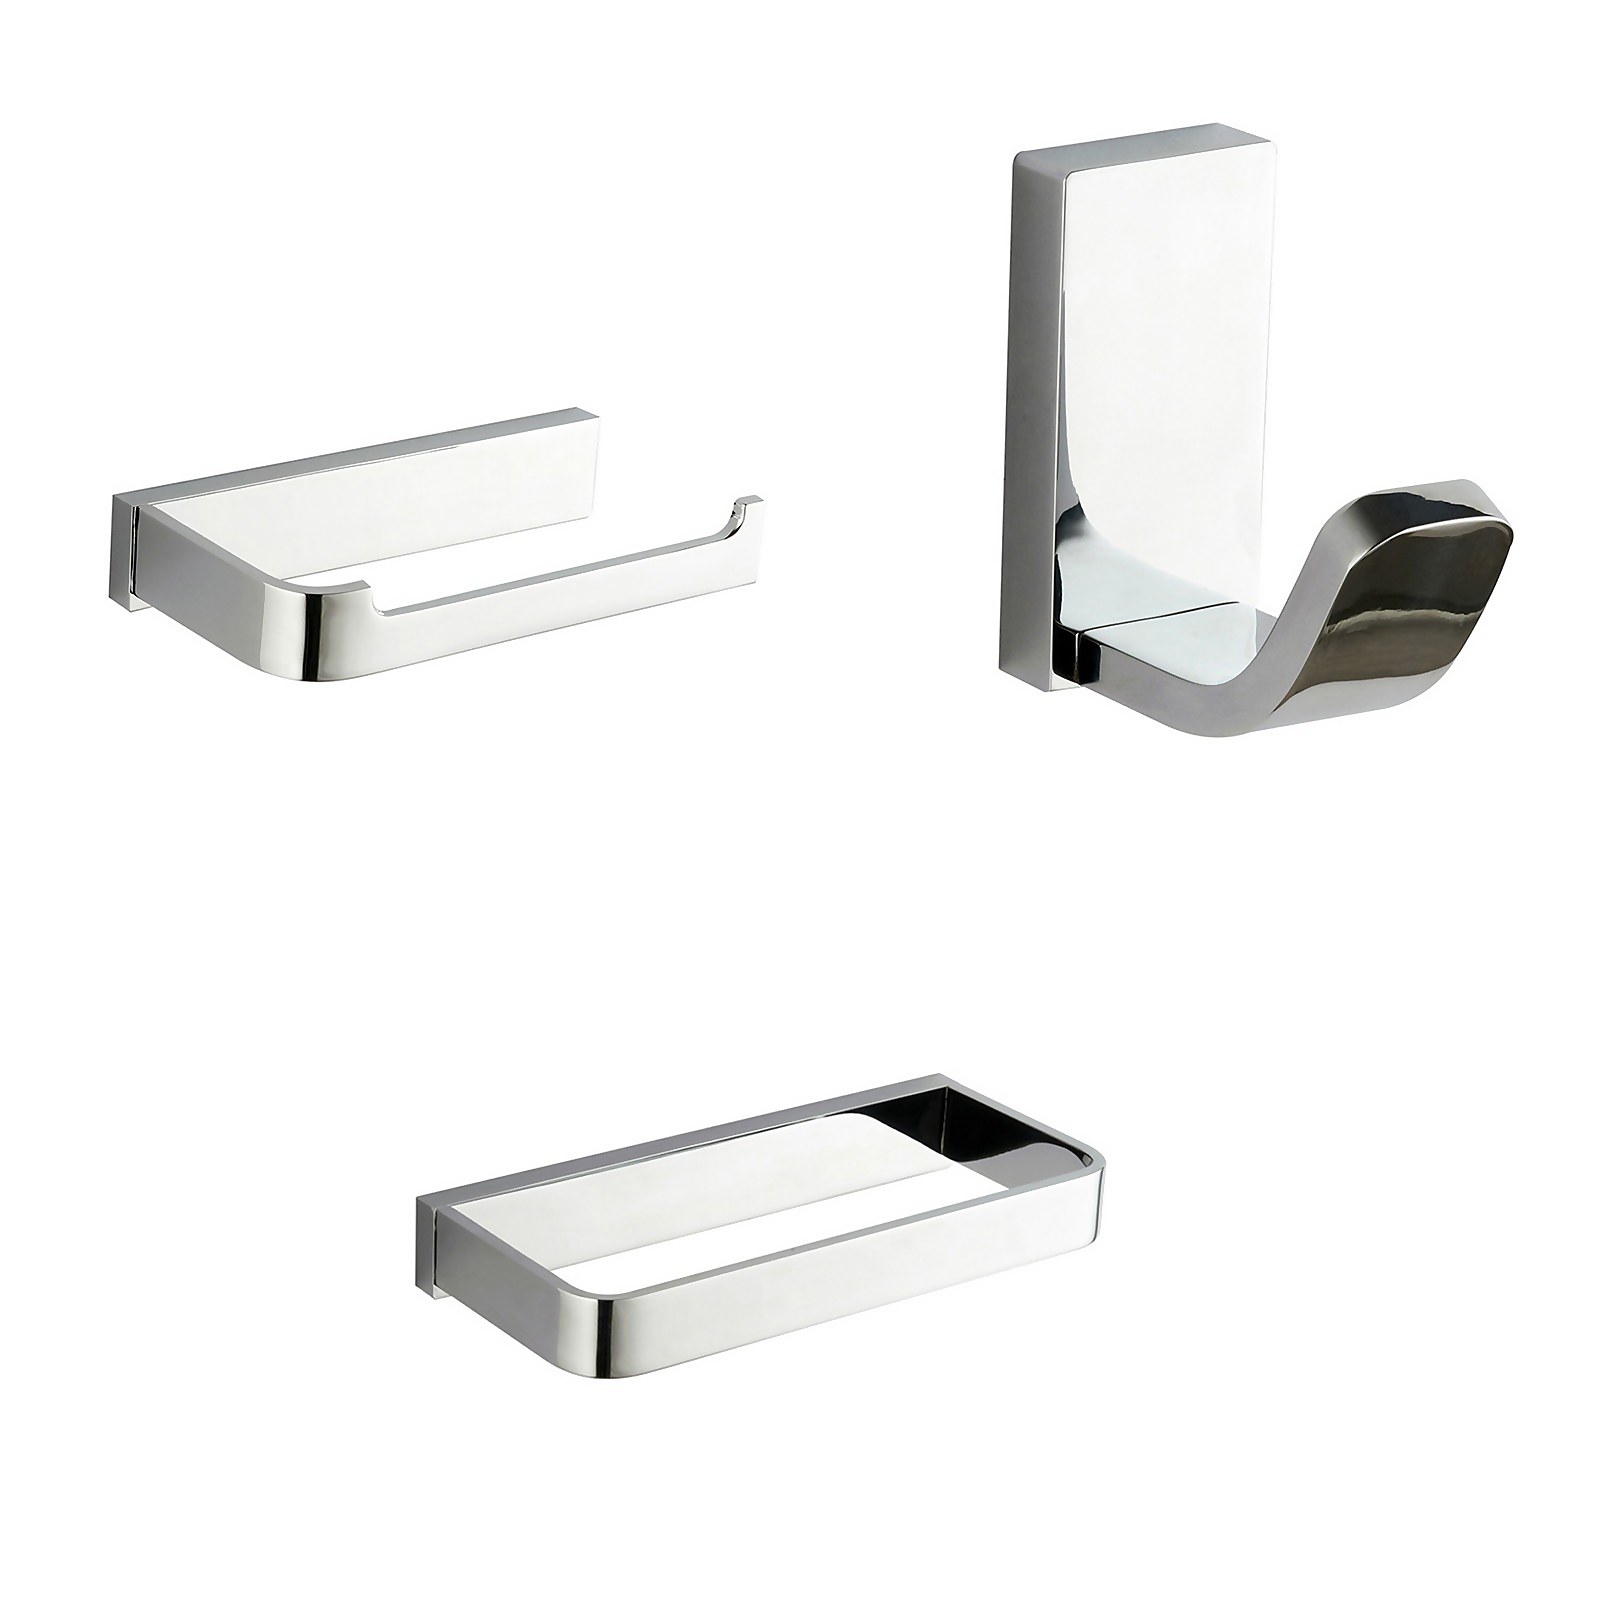 Photo of Modern 3 Piece Wall Mounted Bathroom Accessories Set